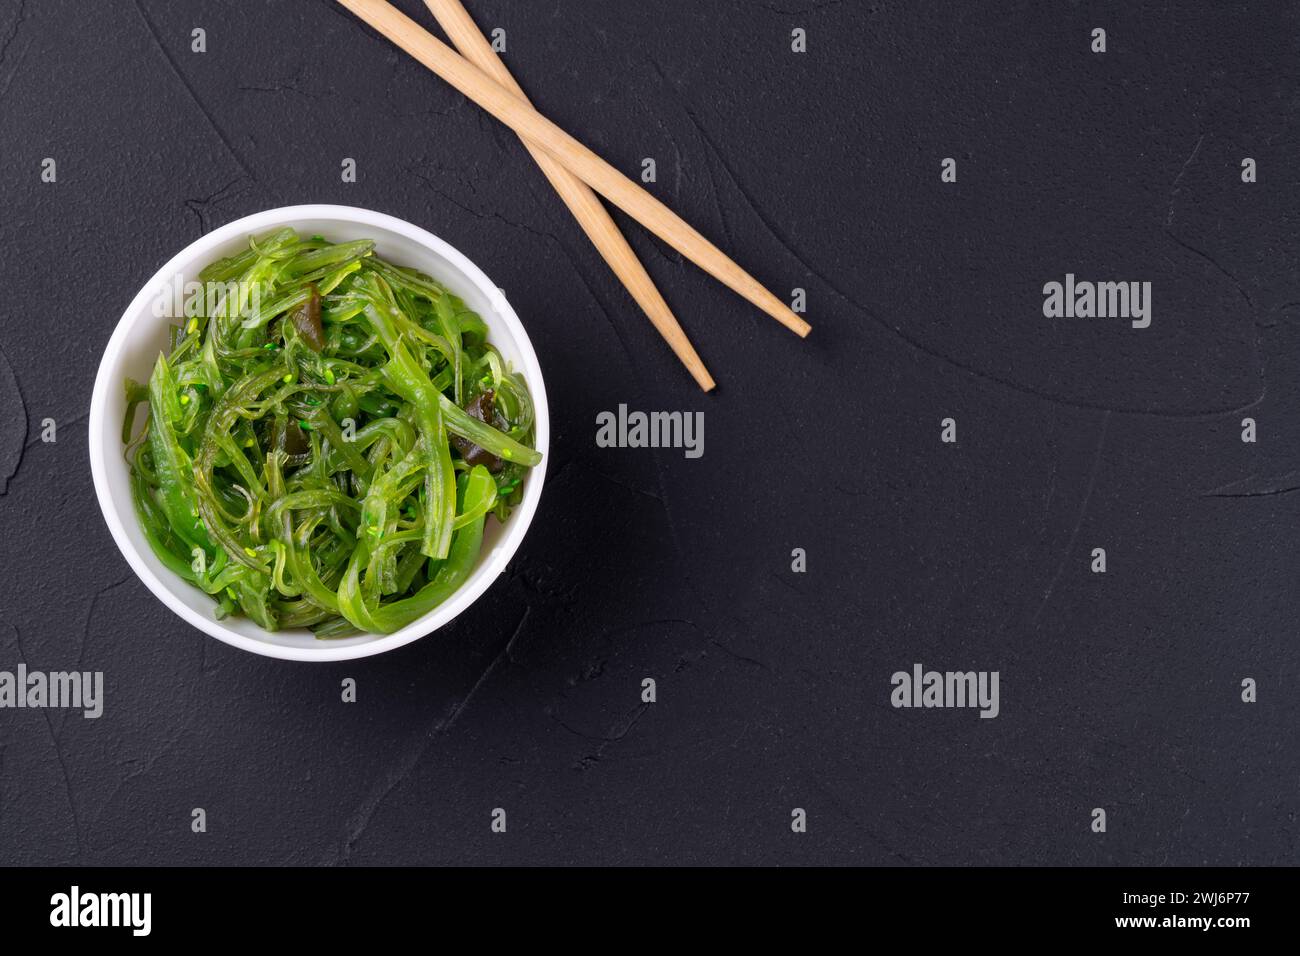 Chuka seaweed salad in a plate with chopsticks on a dark background Stock Photo